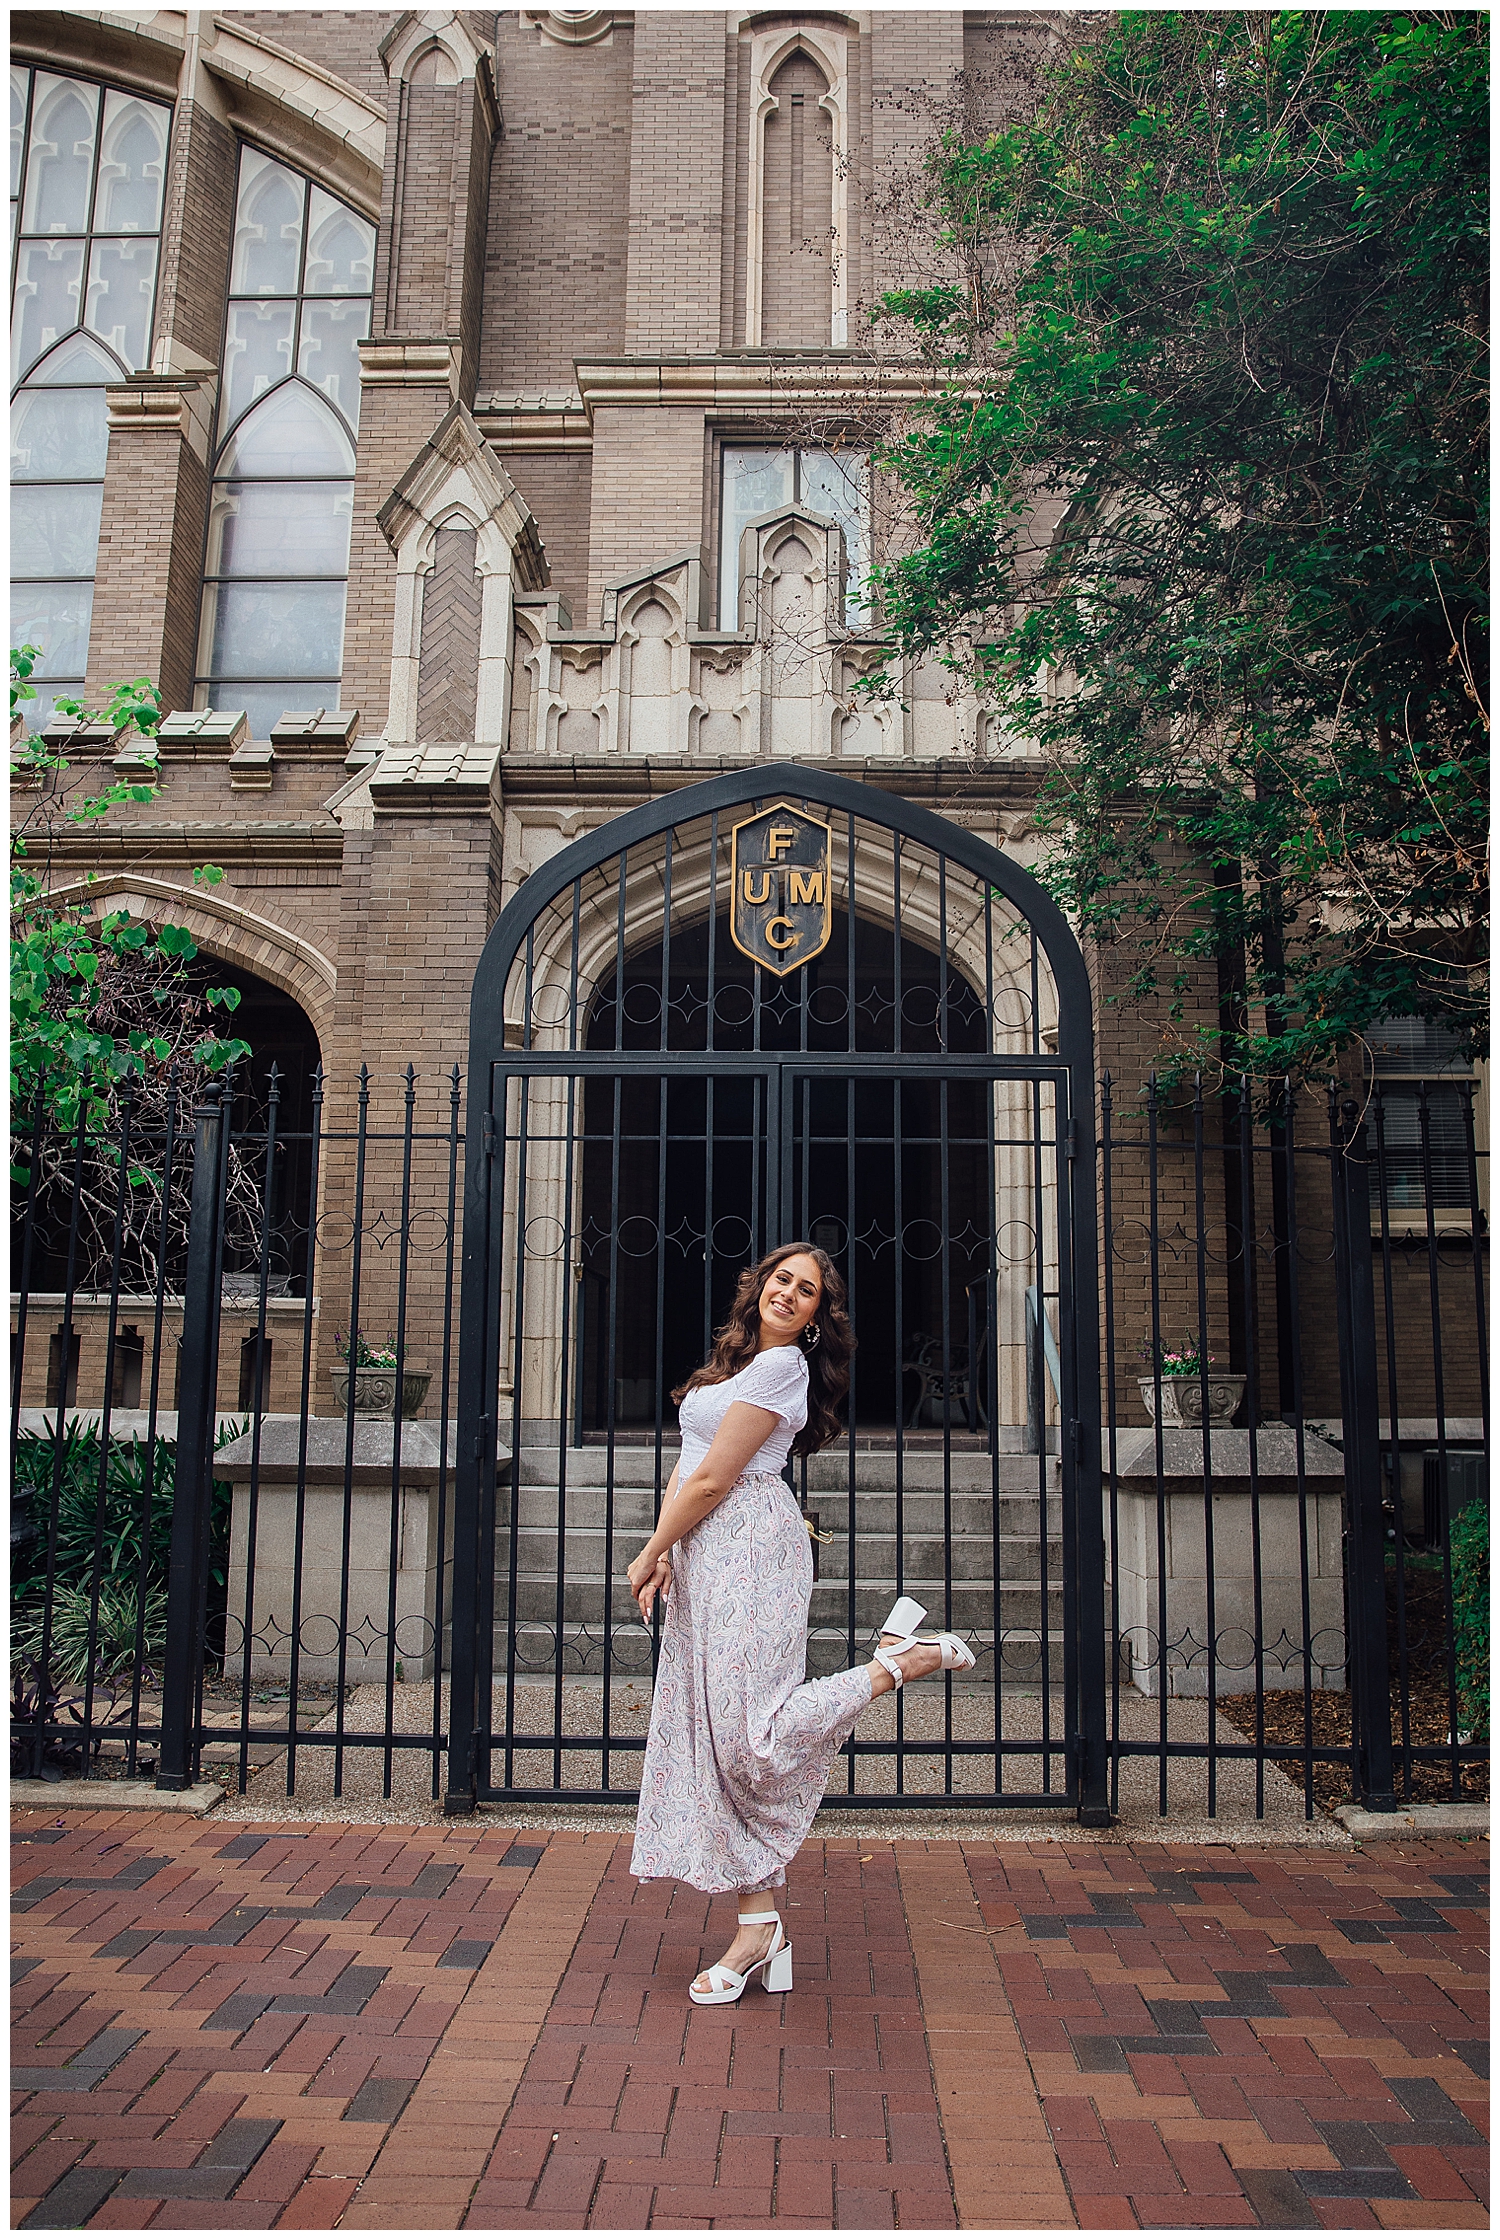 Senior girl posing with heel in air in front of church on Main Street downtown Houston